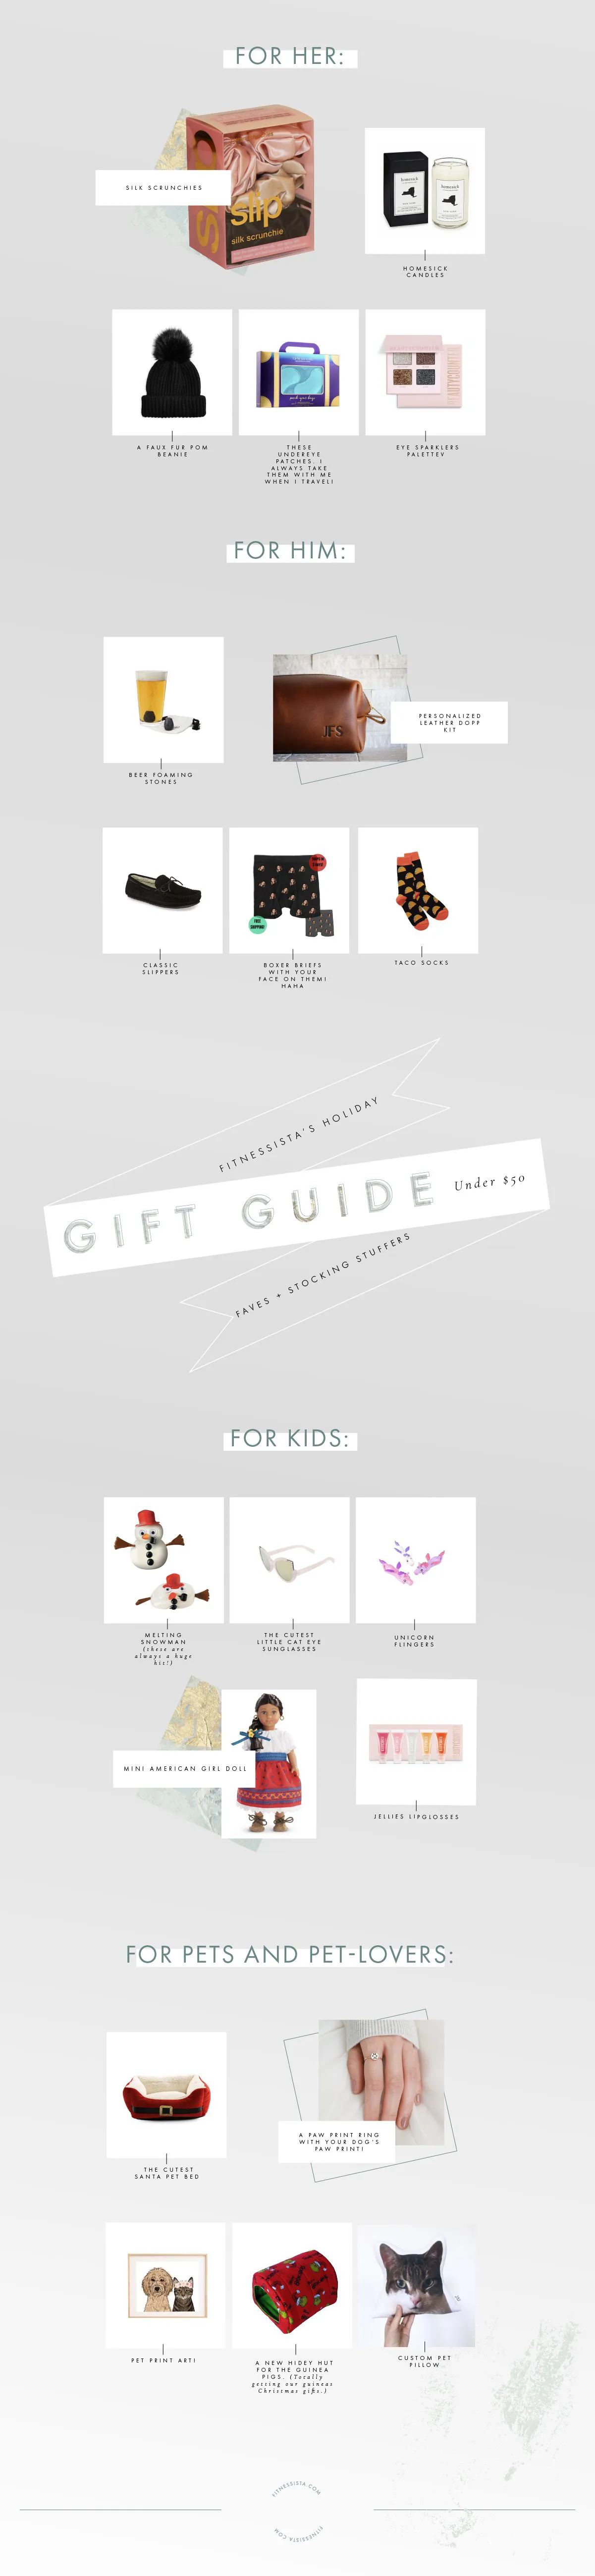 Under 50 gift ideas and stocking stuffers